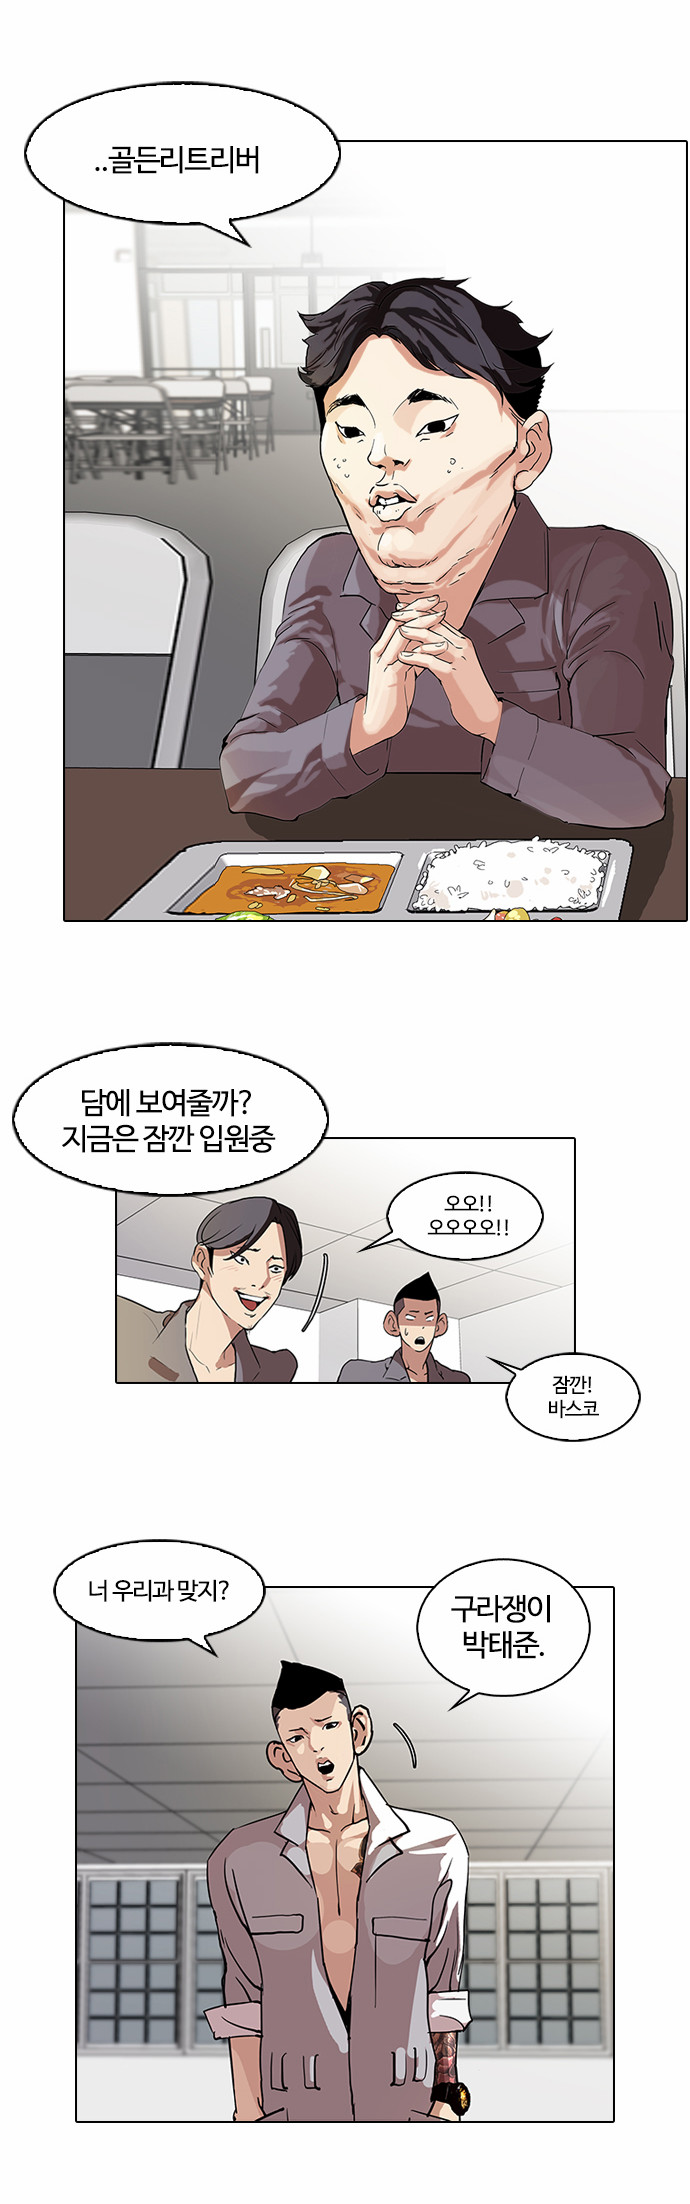 Lookism - Chapter 63 - Page 3